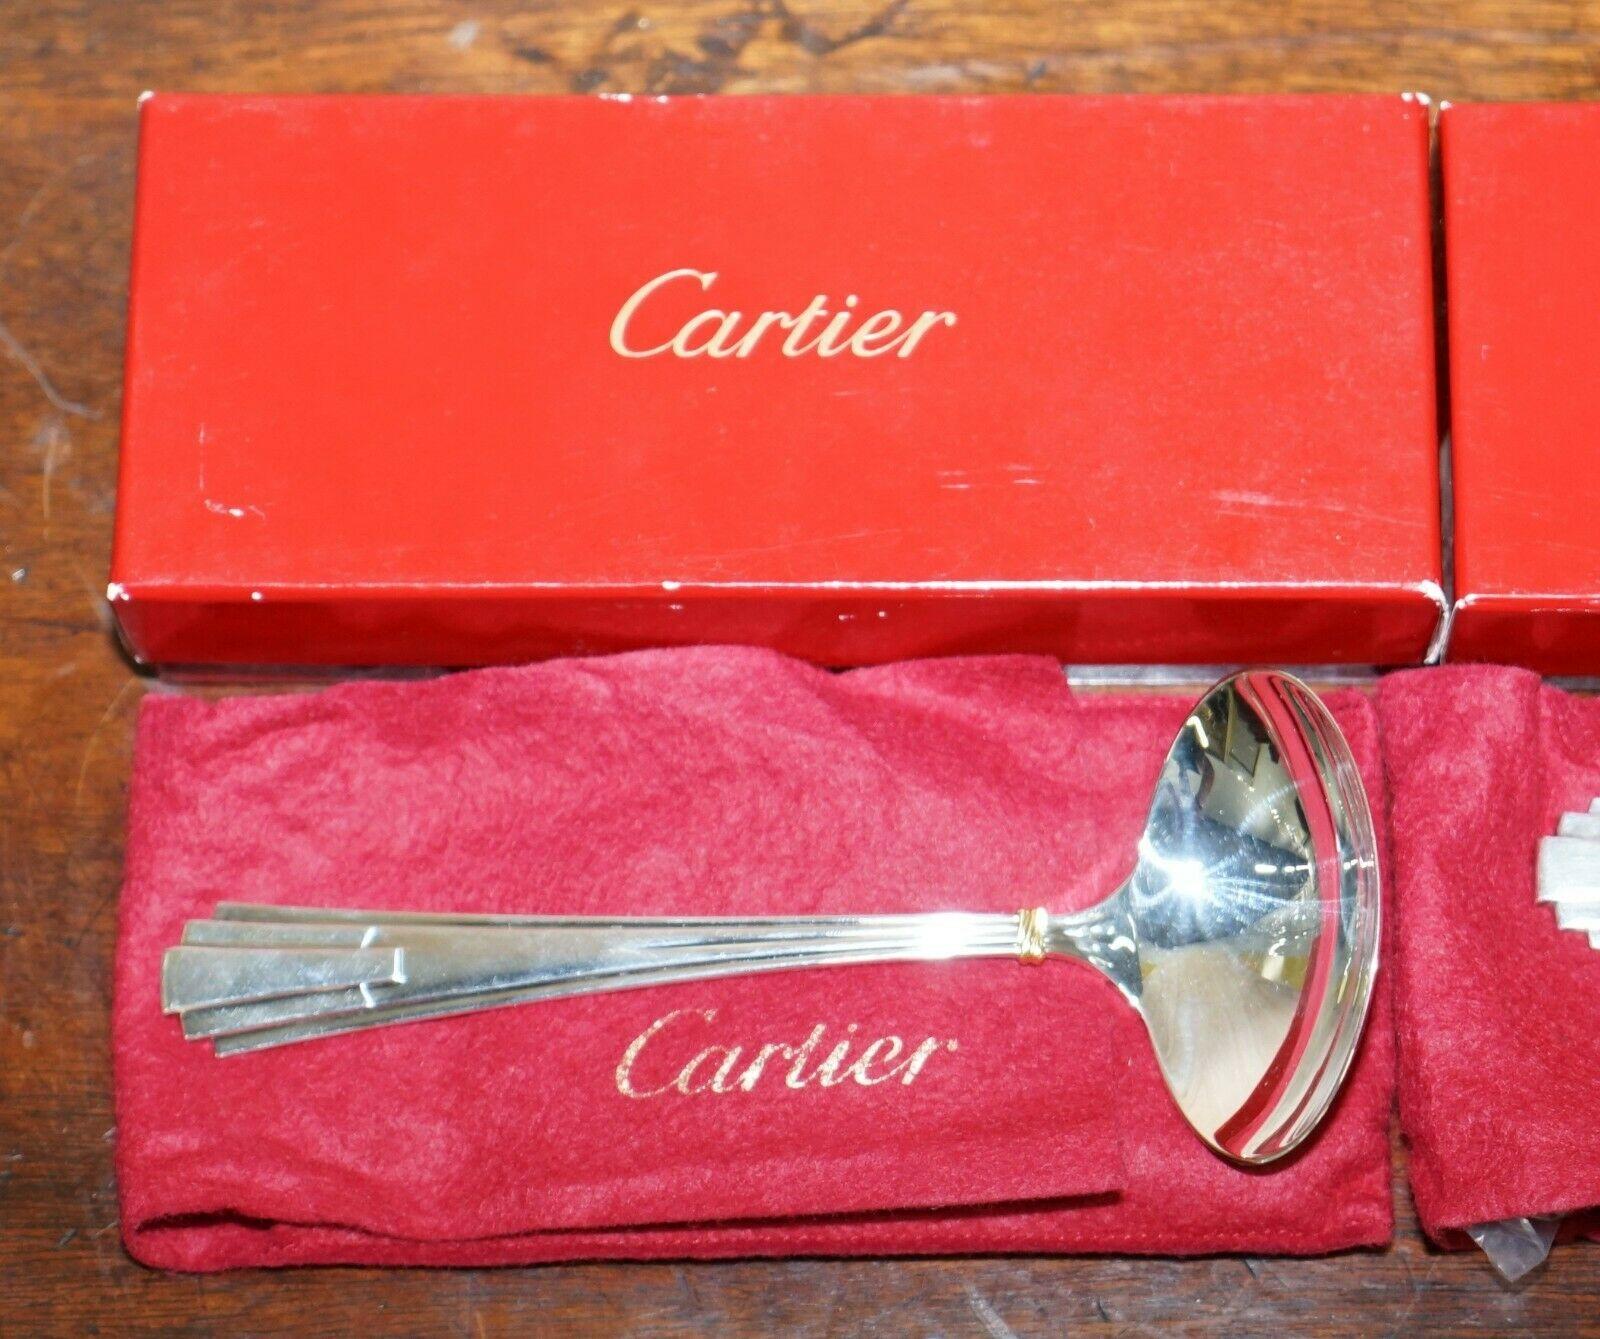 Wimbledon-Furniture

Wimbledon-Furniture is delighted to offer for sale this stunning pair of brand new Solid Sterling silver with gold accents and boxed Cartier La Maison De Louis gravy ladles

These are part of a suite, in total I have the large